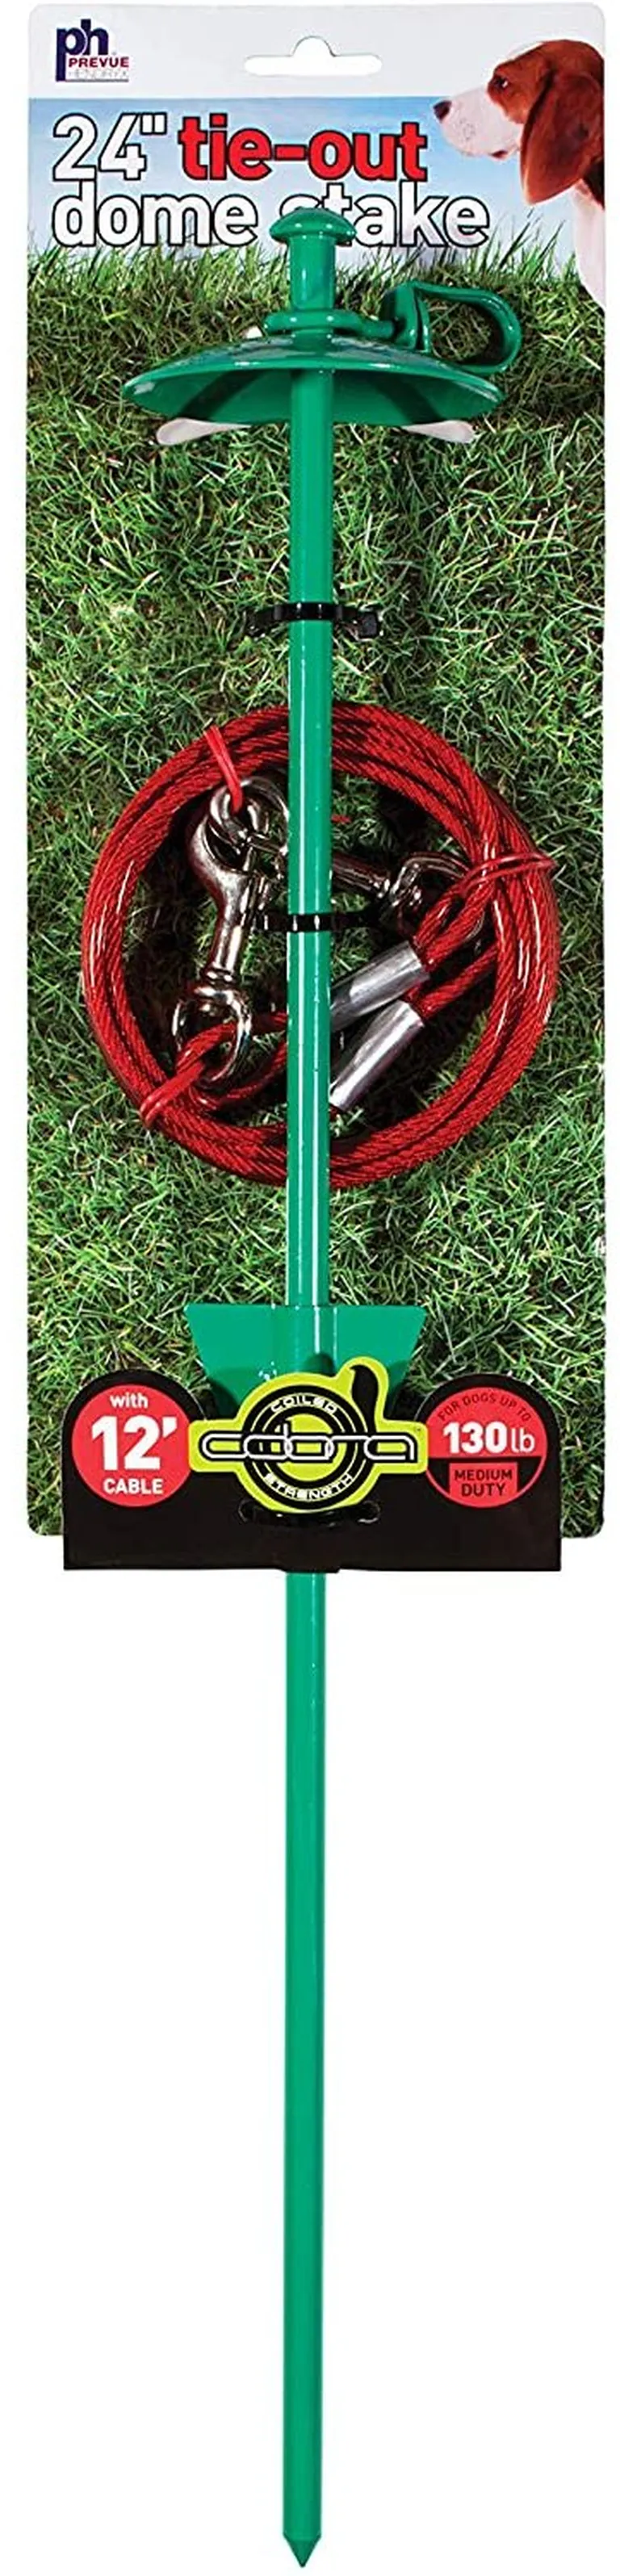 Prevue Pet Products 24 Inch Tie-out Dome Stake with 12 Foot Cable Photo 1